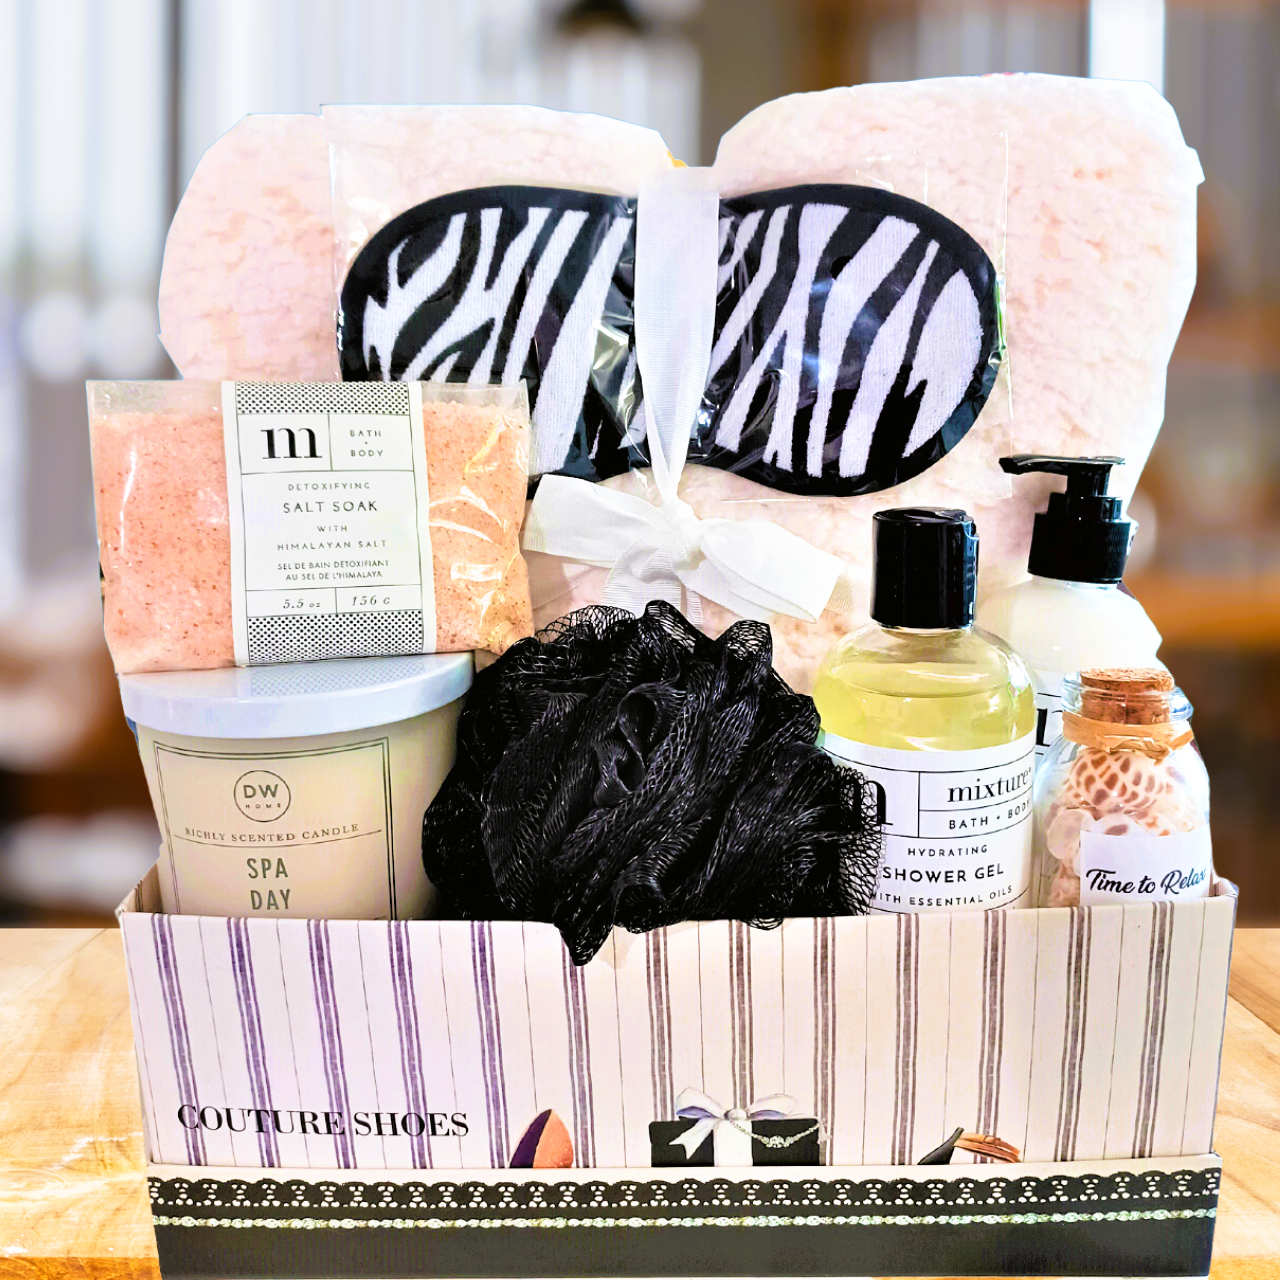 Serenity Spa -Gift Collection for Women - Send gifts for birthday, mother's day or any special gift occasion